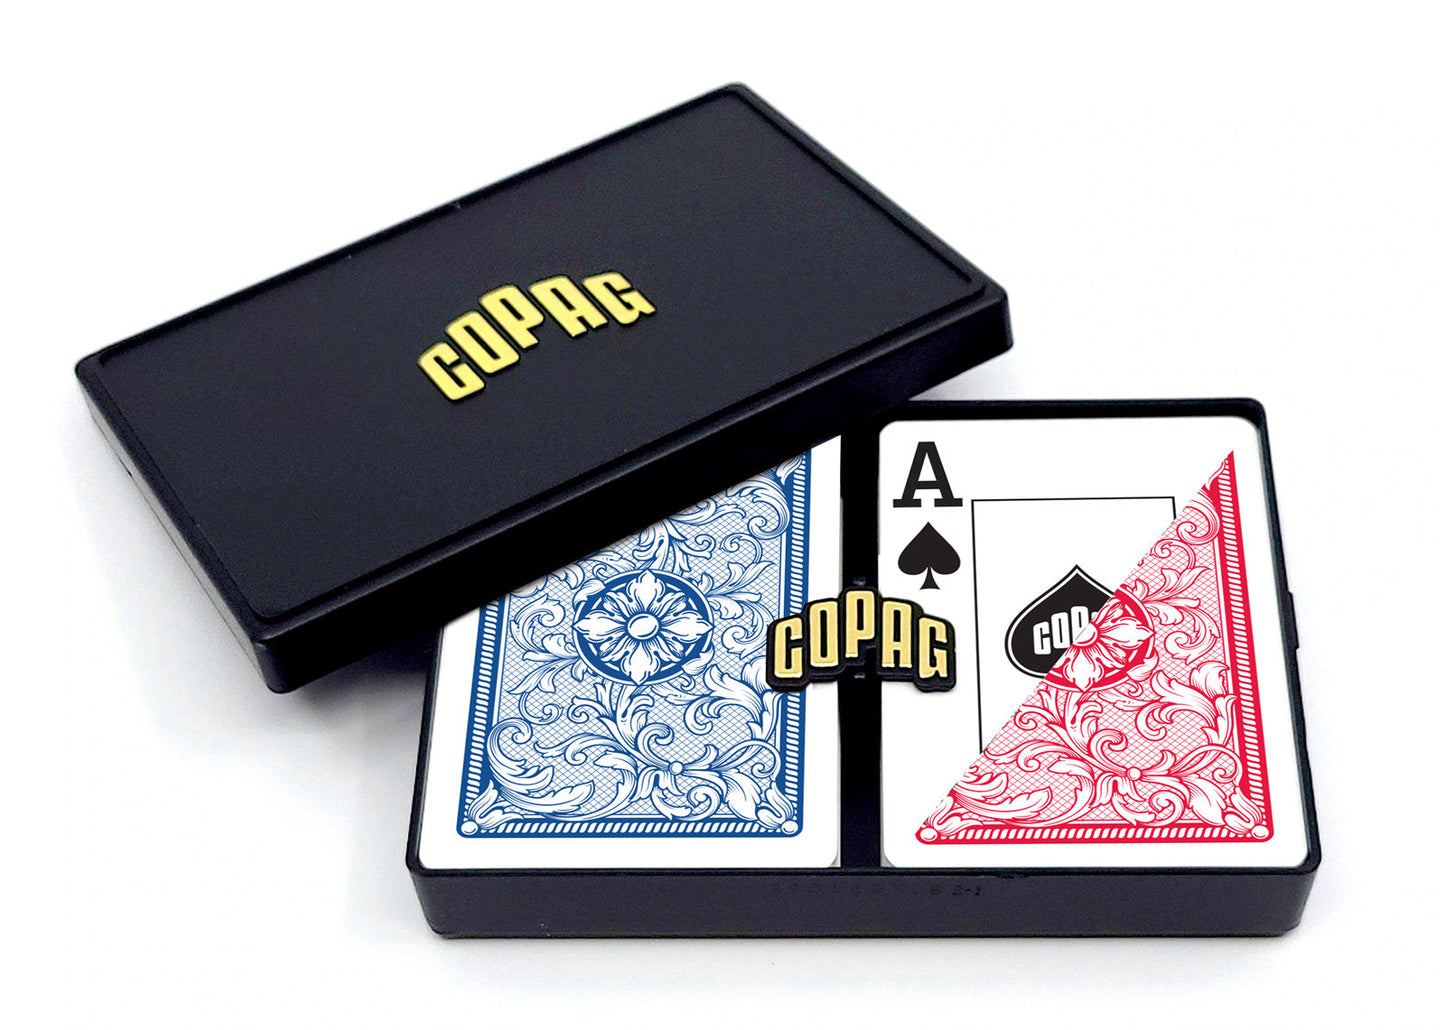 Barcode Marked Cards - Copag legacy Poker Size Jumbo | Martin Kabrhel Style | PPPoker Cheat Devices